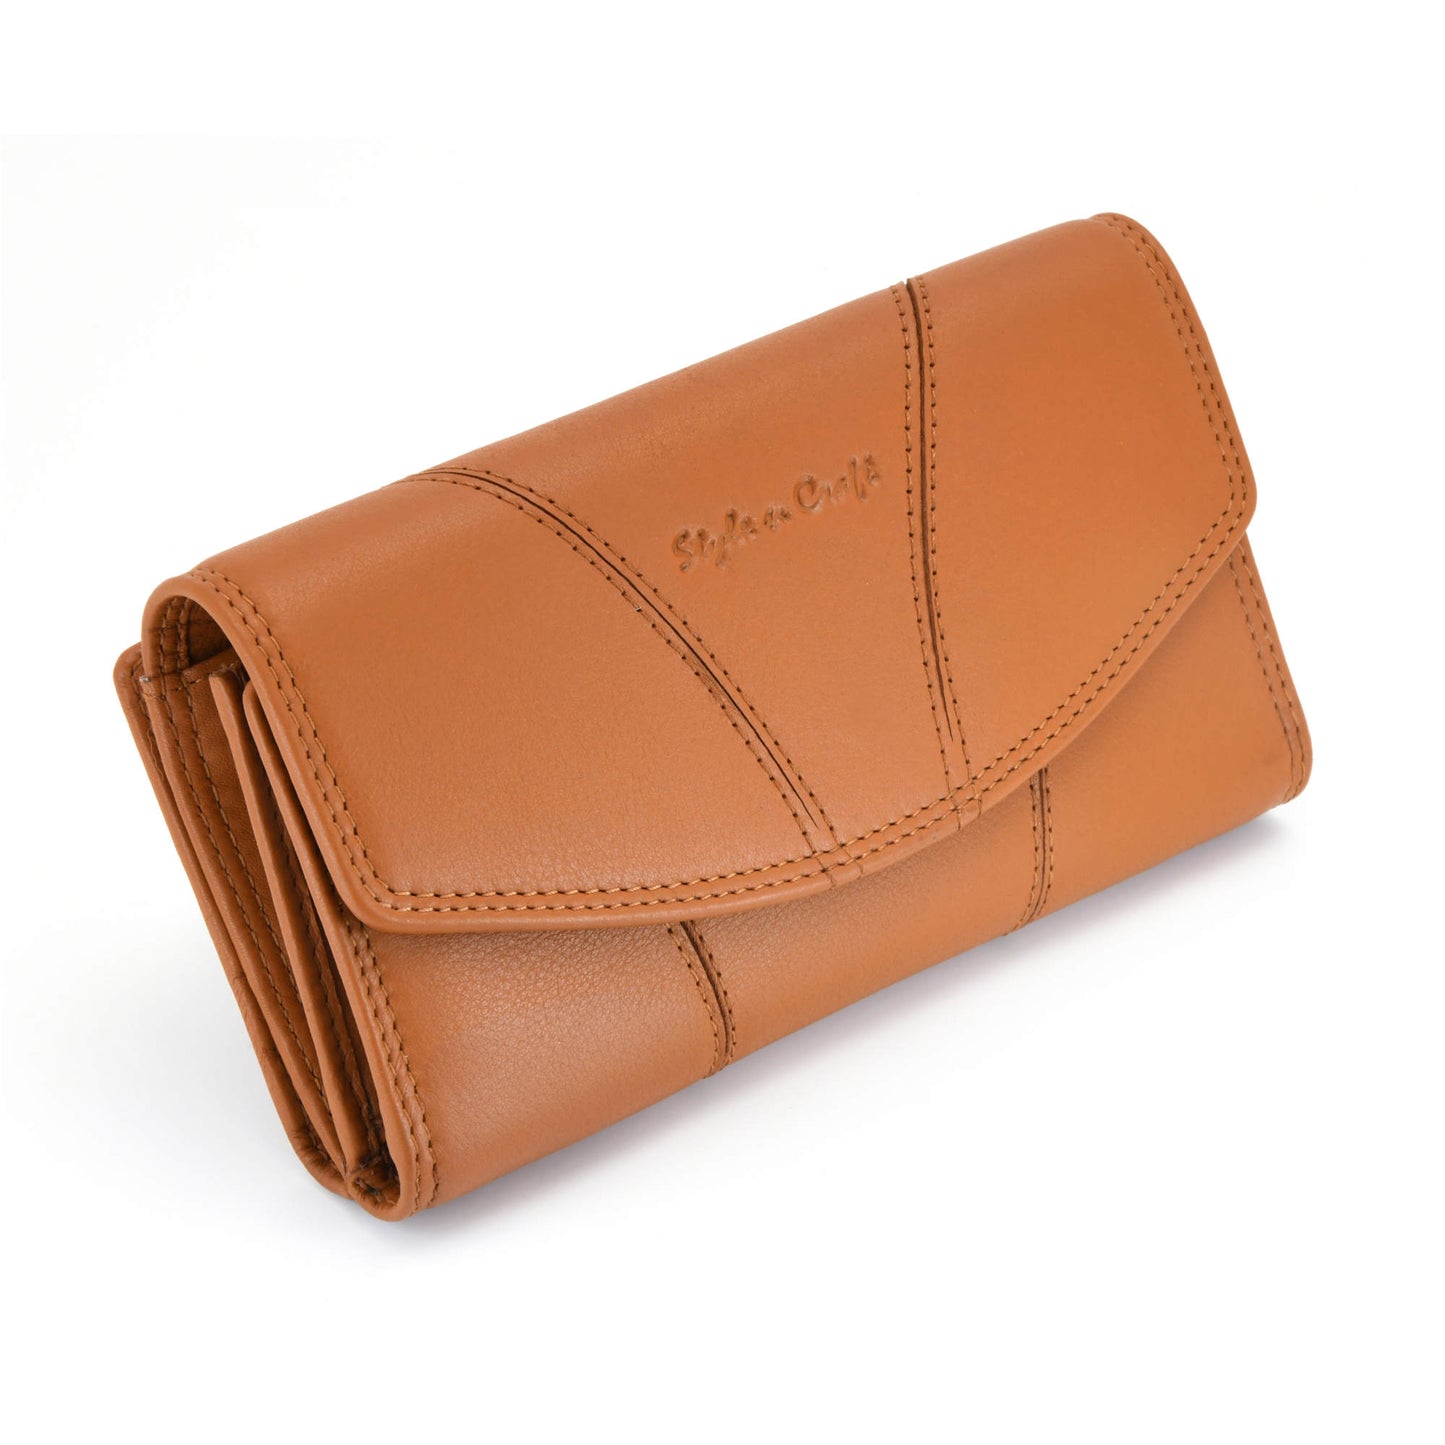 Style n Craft 300954-CG Clutch Wallet for Ladies in Cow Leather - Tan Color - Front Closed Angled View